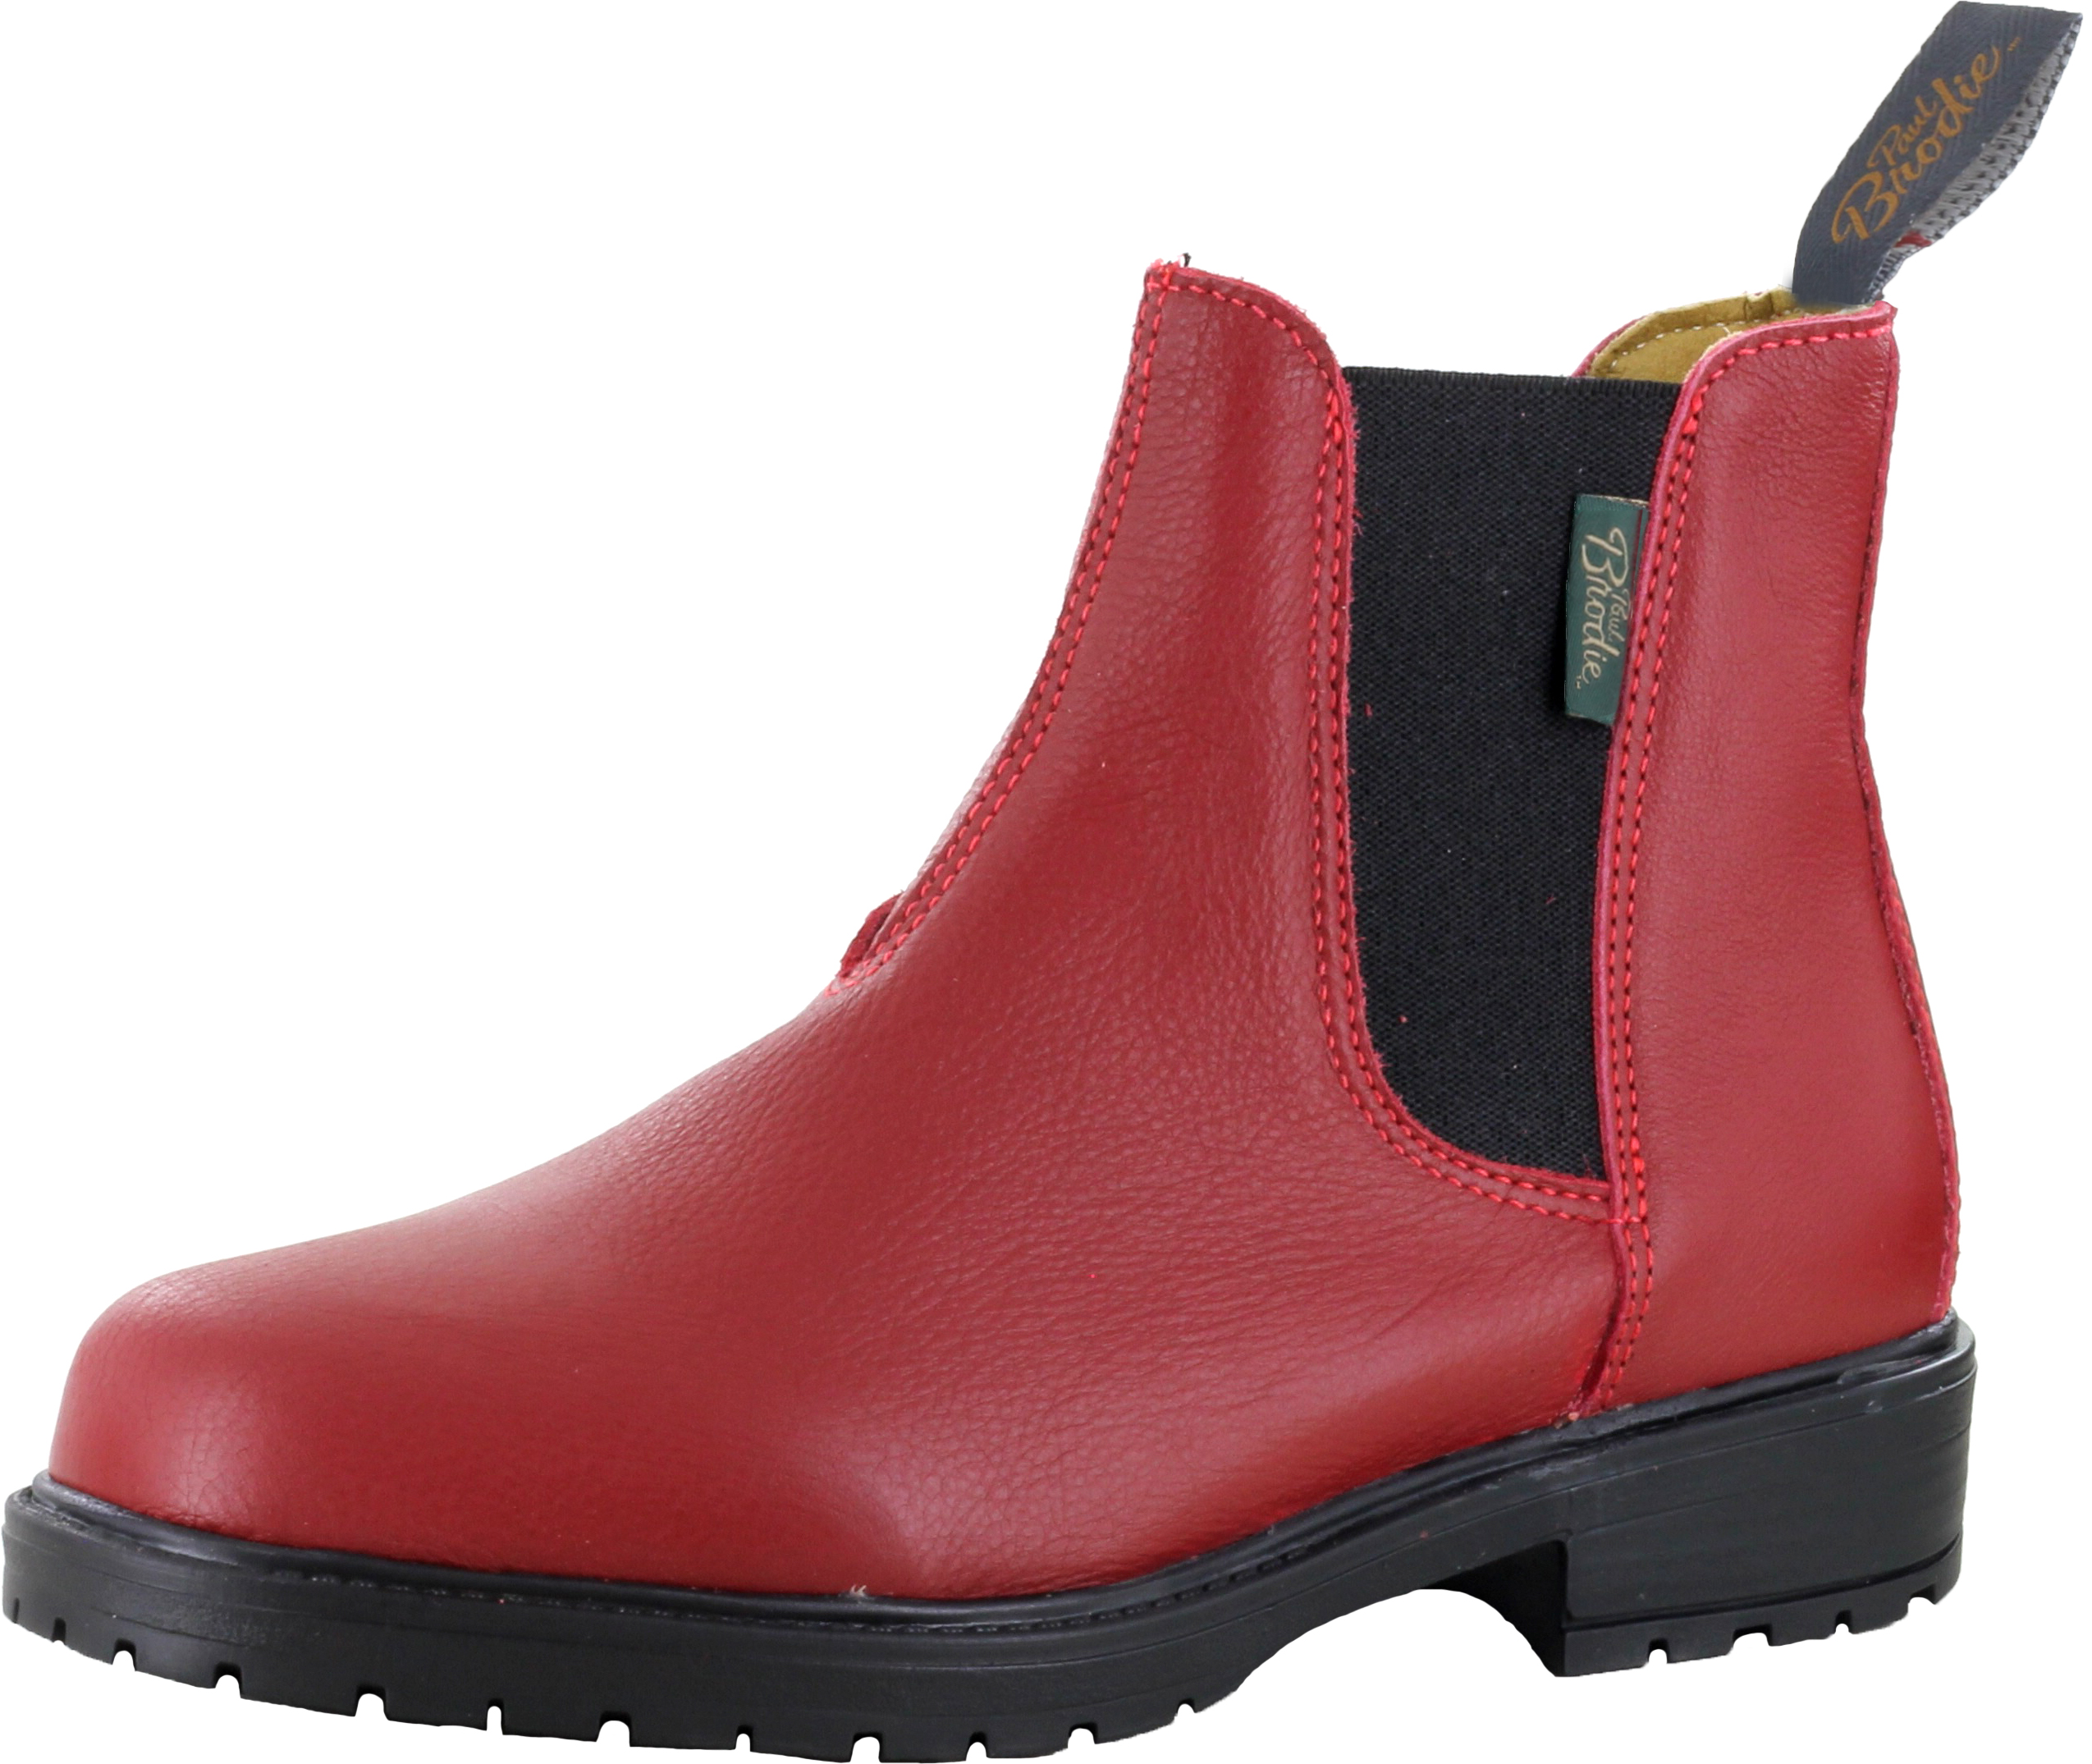 Paul Brodie Double Gore Boot - Red